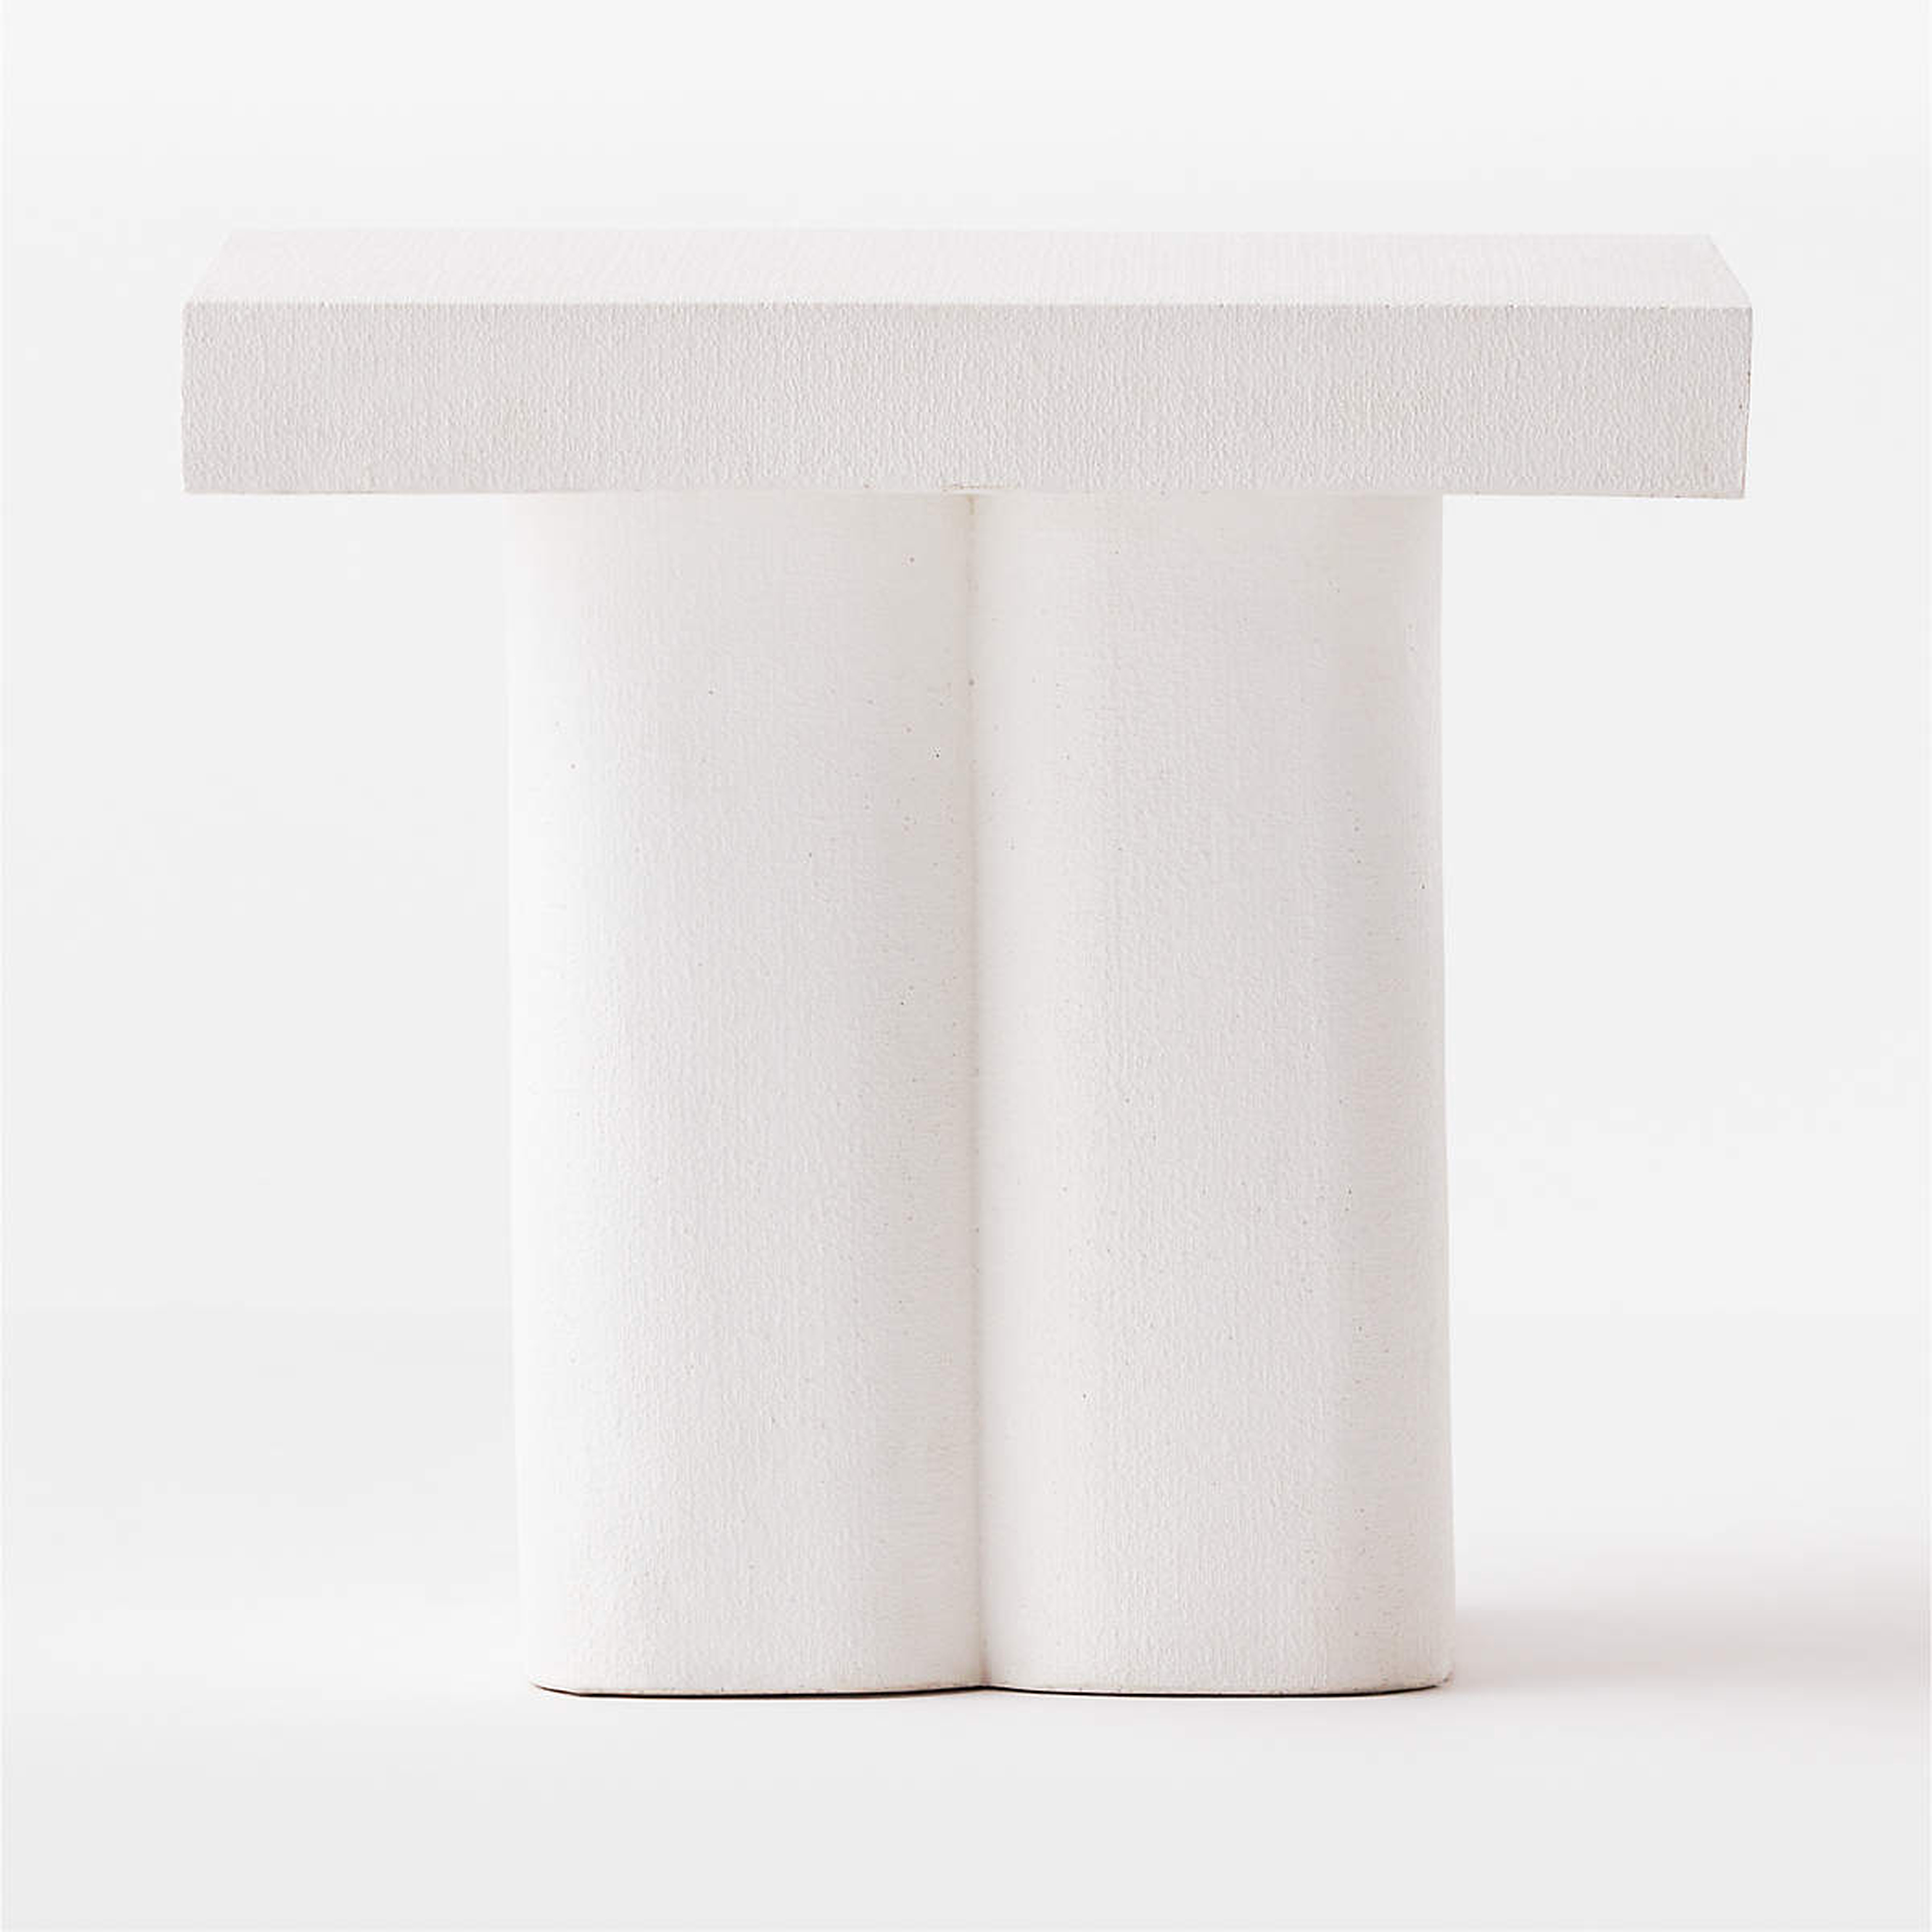 Bisque Plaster Side Table - CB2